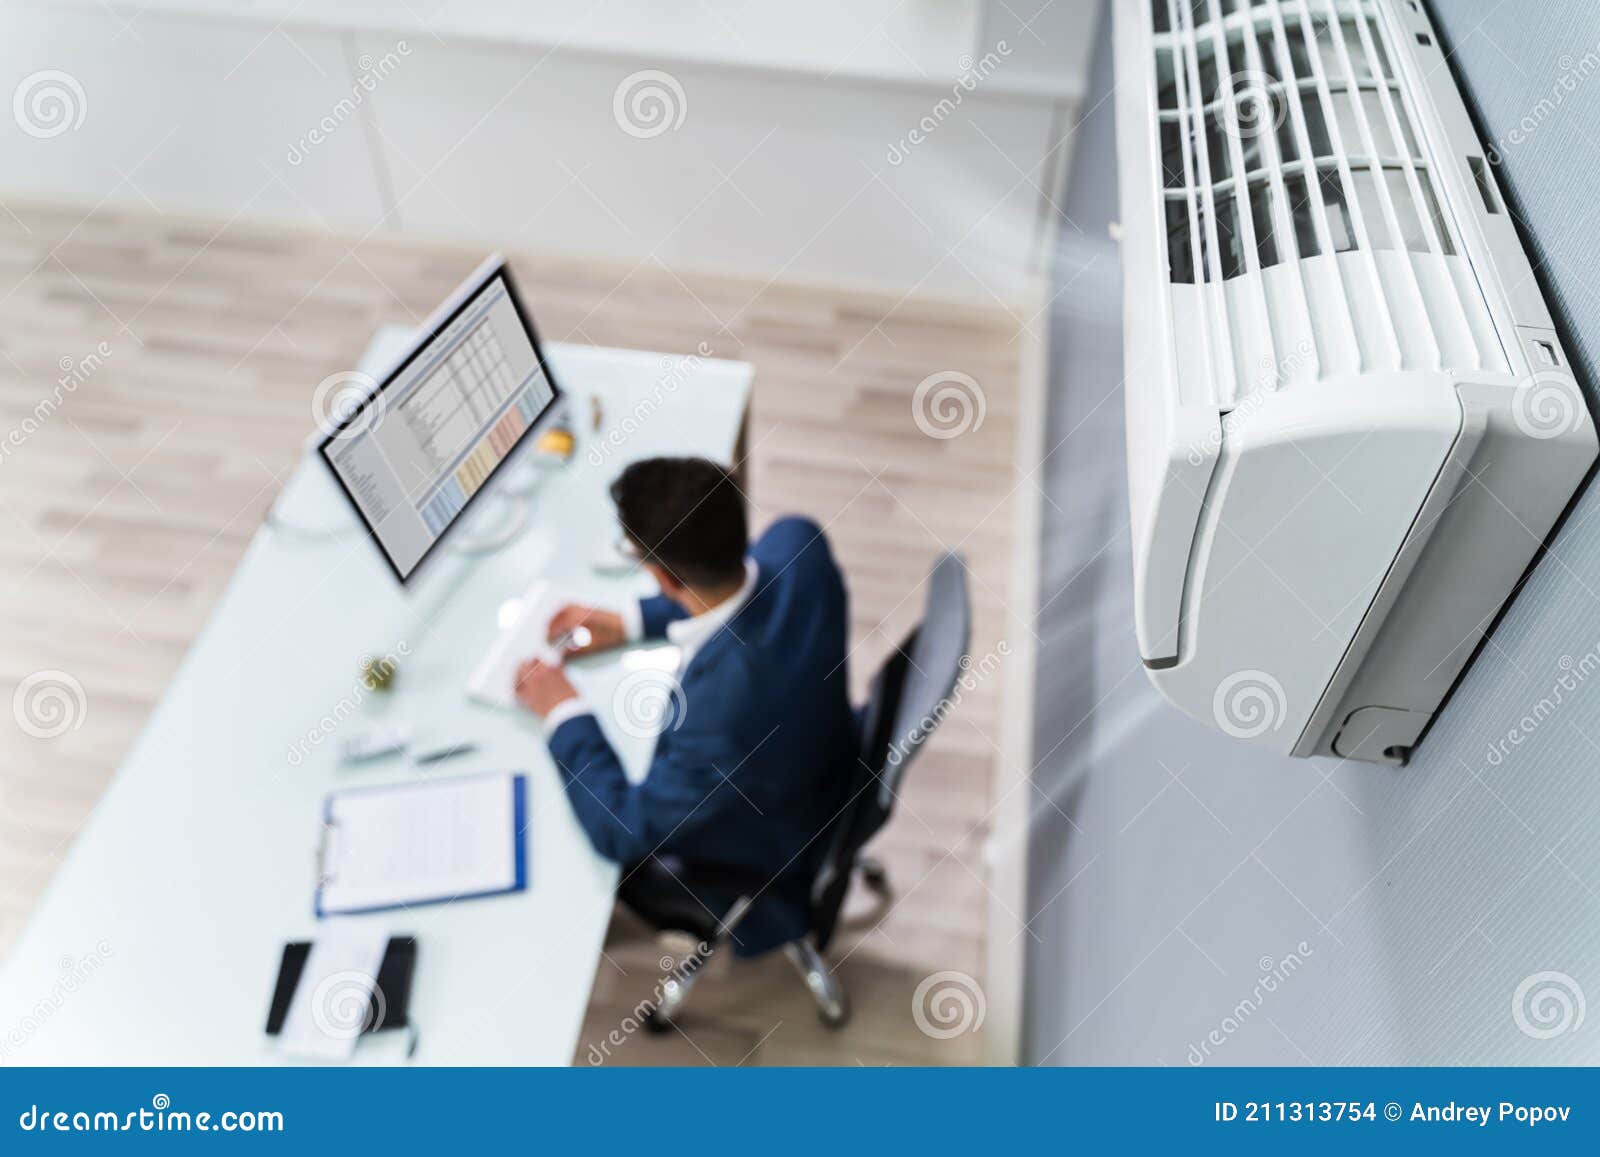 businessman enjoying the cooling of air conditioner